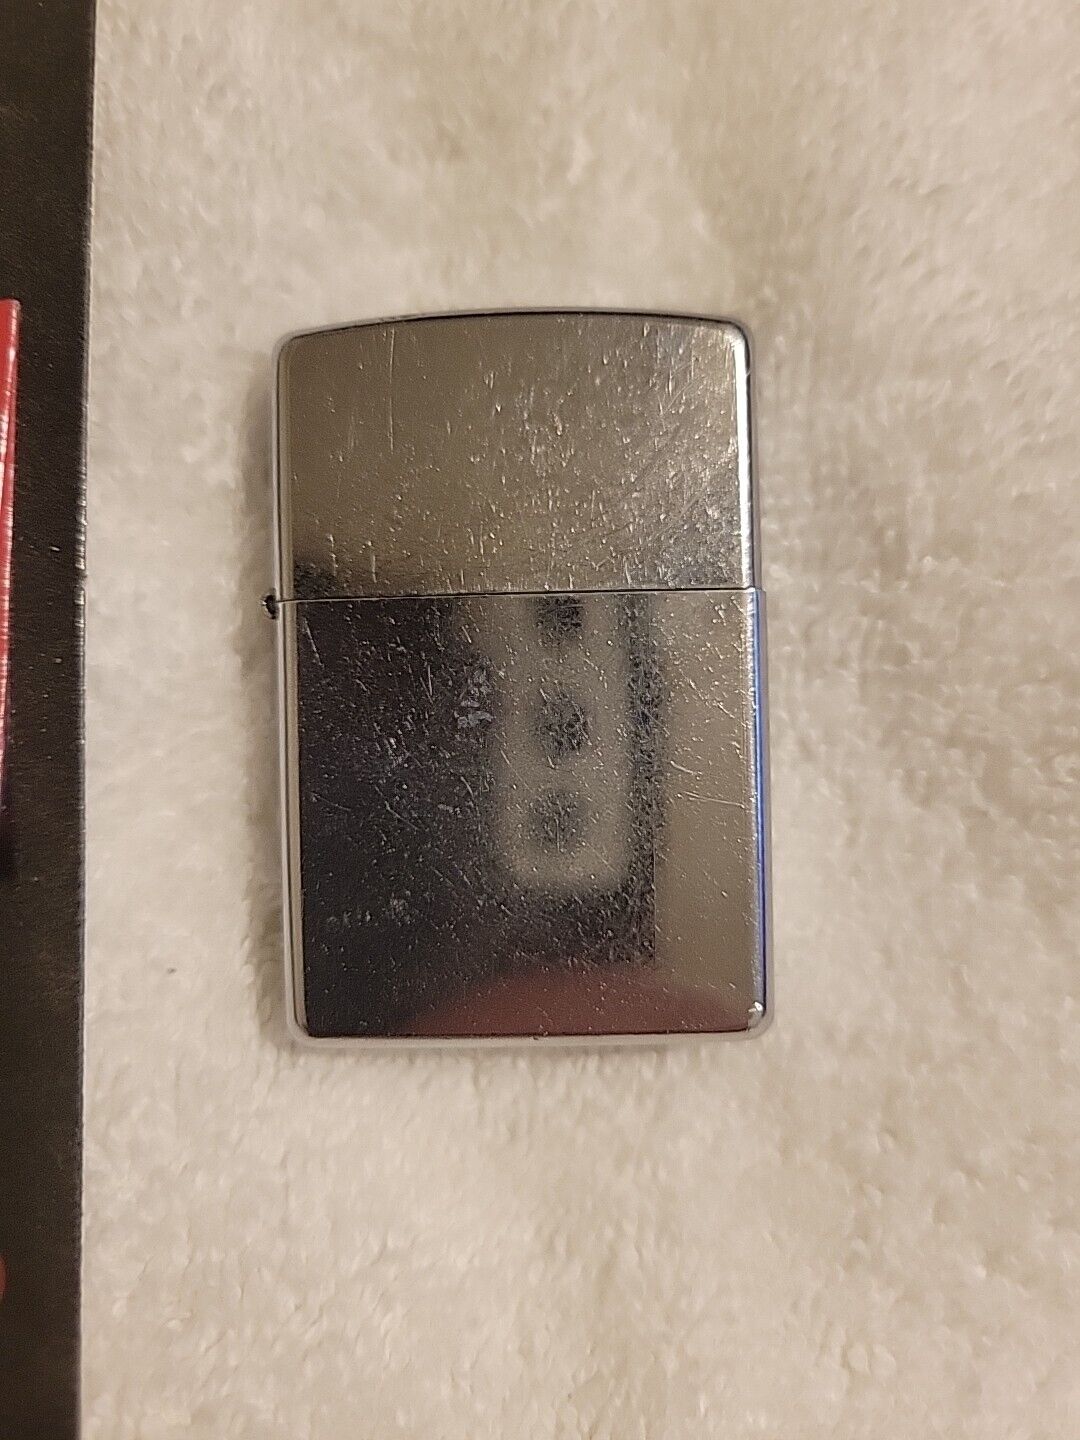 Zippo Brushed Stainless Steel E 03 Lighter Model Working Great